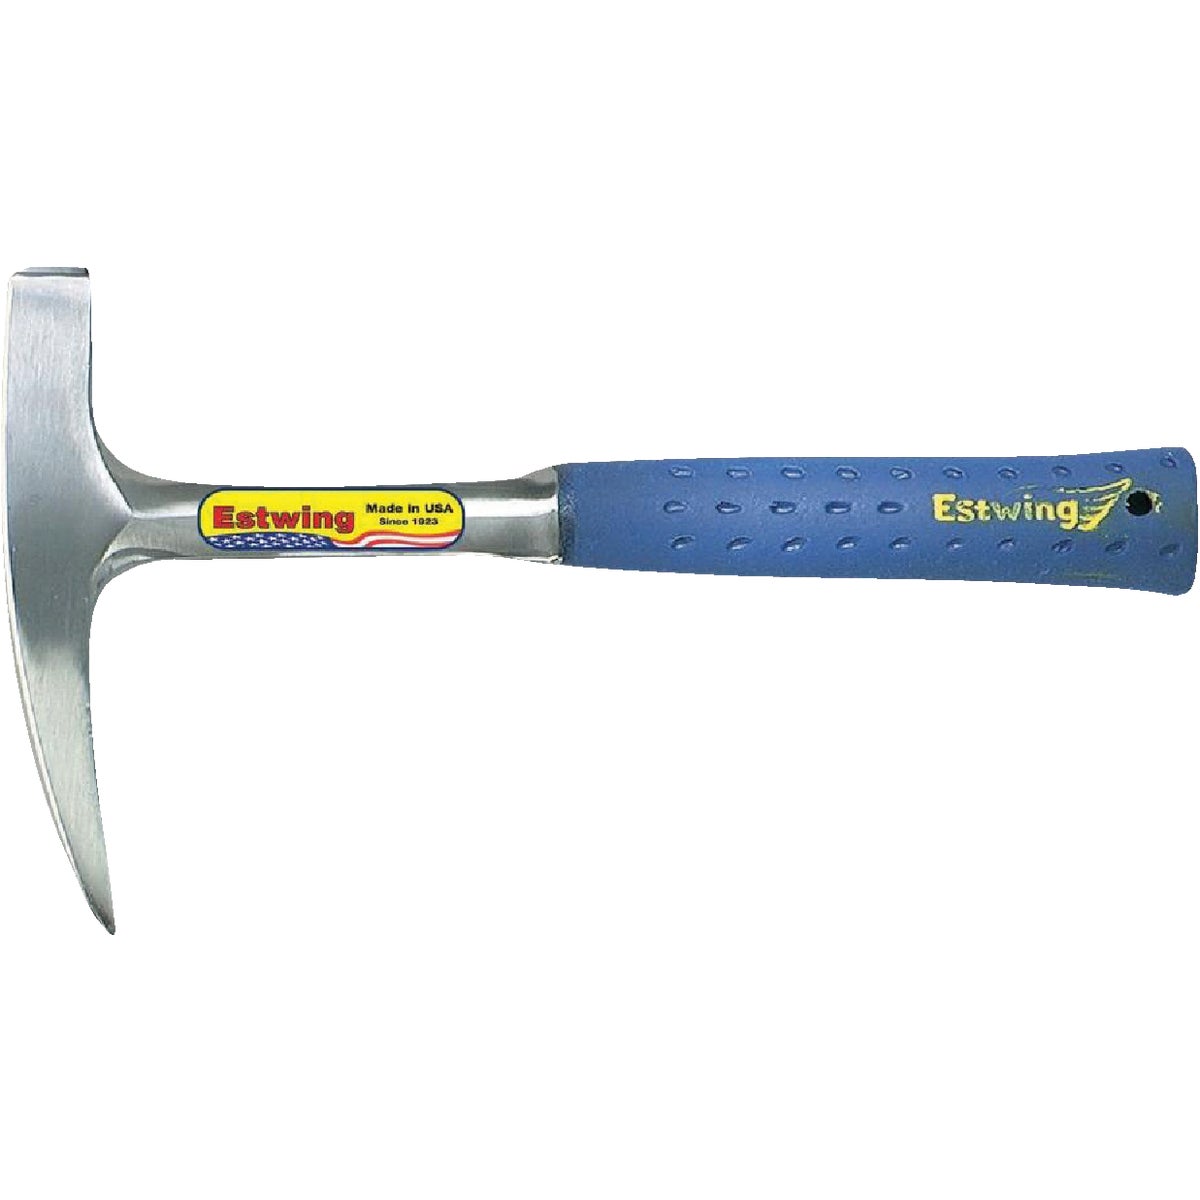 Item 316946, Forged 1-piece head and handle, and fully polished tool steel head.